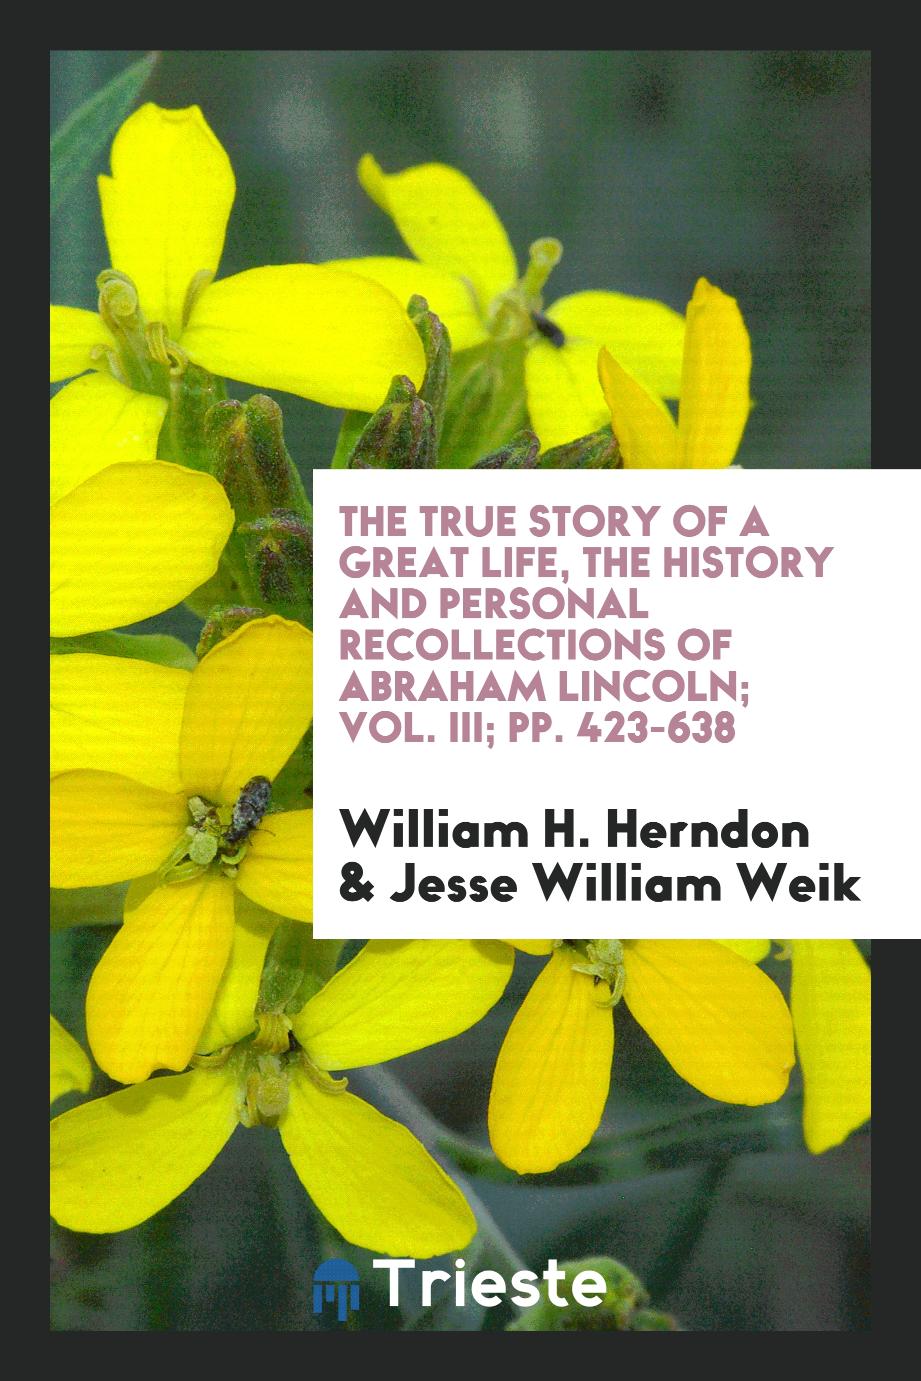 The true story of a great life, the history and personal recollections of Abraham Lincoln; Vol. III; pp. 423-638